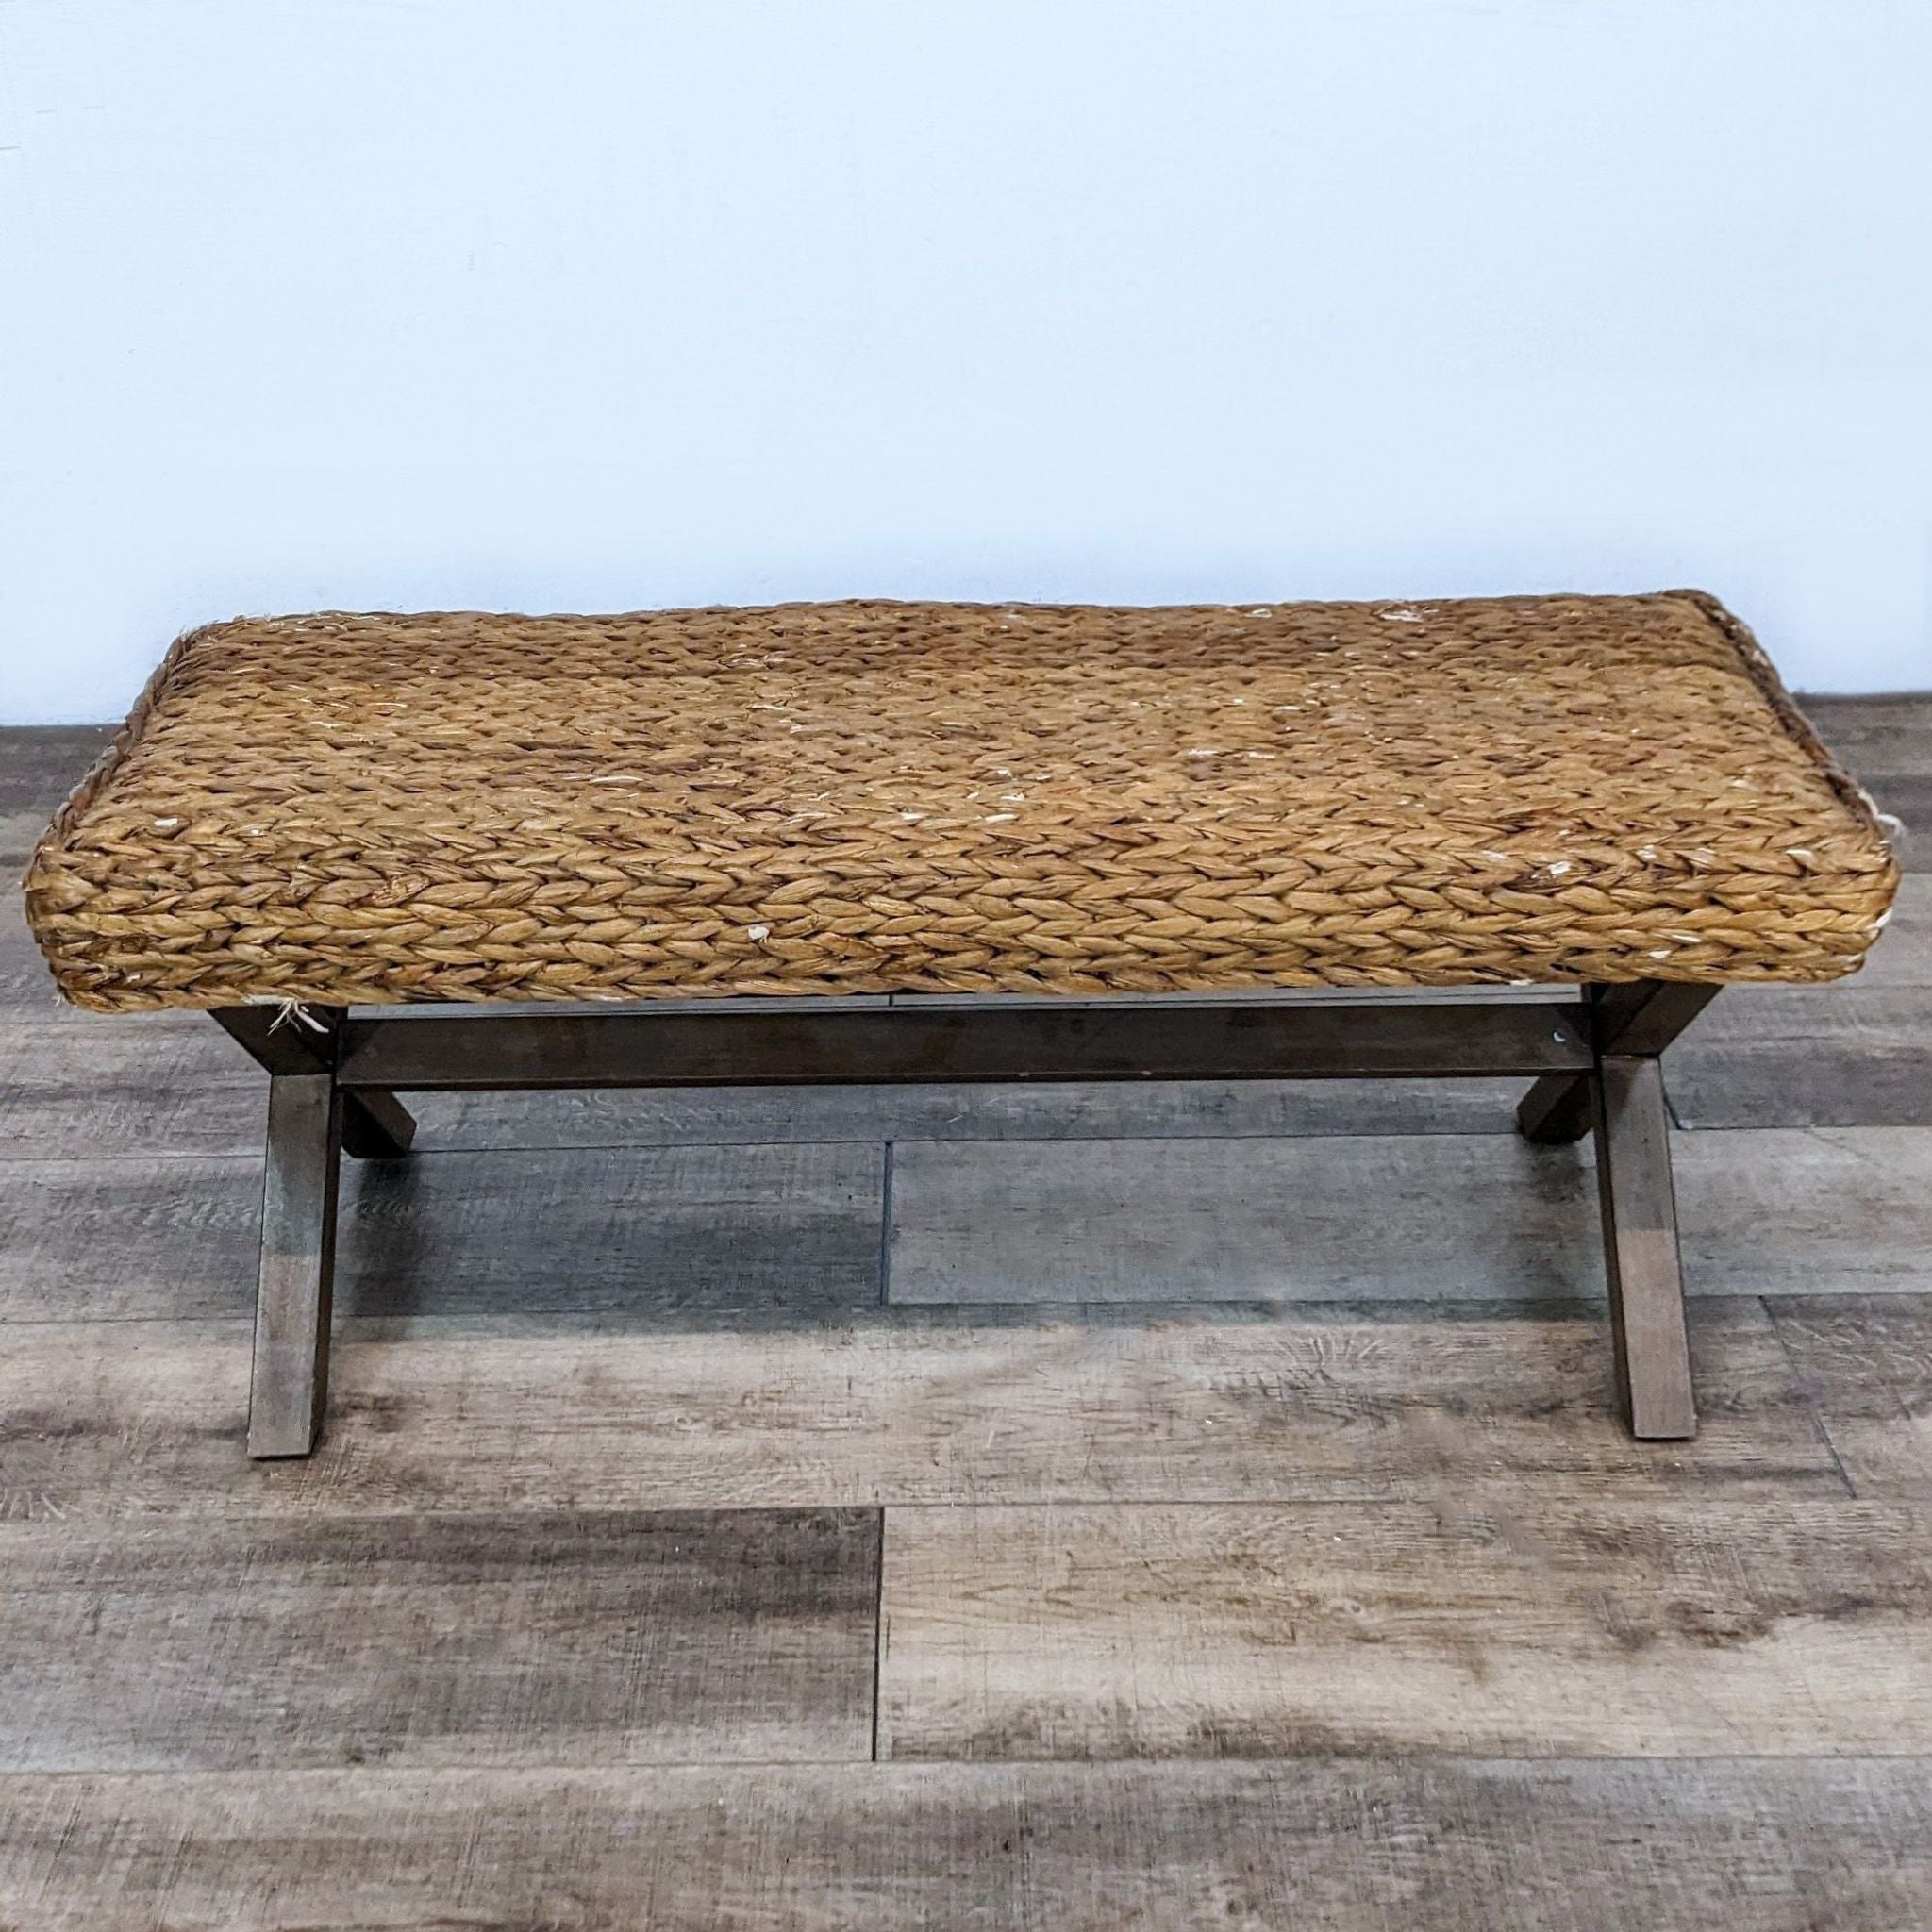 Alt text 1: A woven reed bench with a unique crisscross solid wood leg design by Reperch, sitting on a wooden floor.